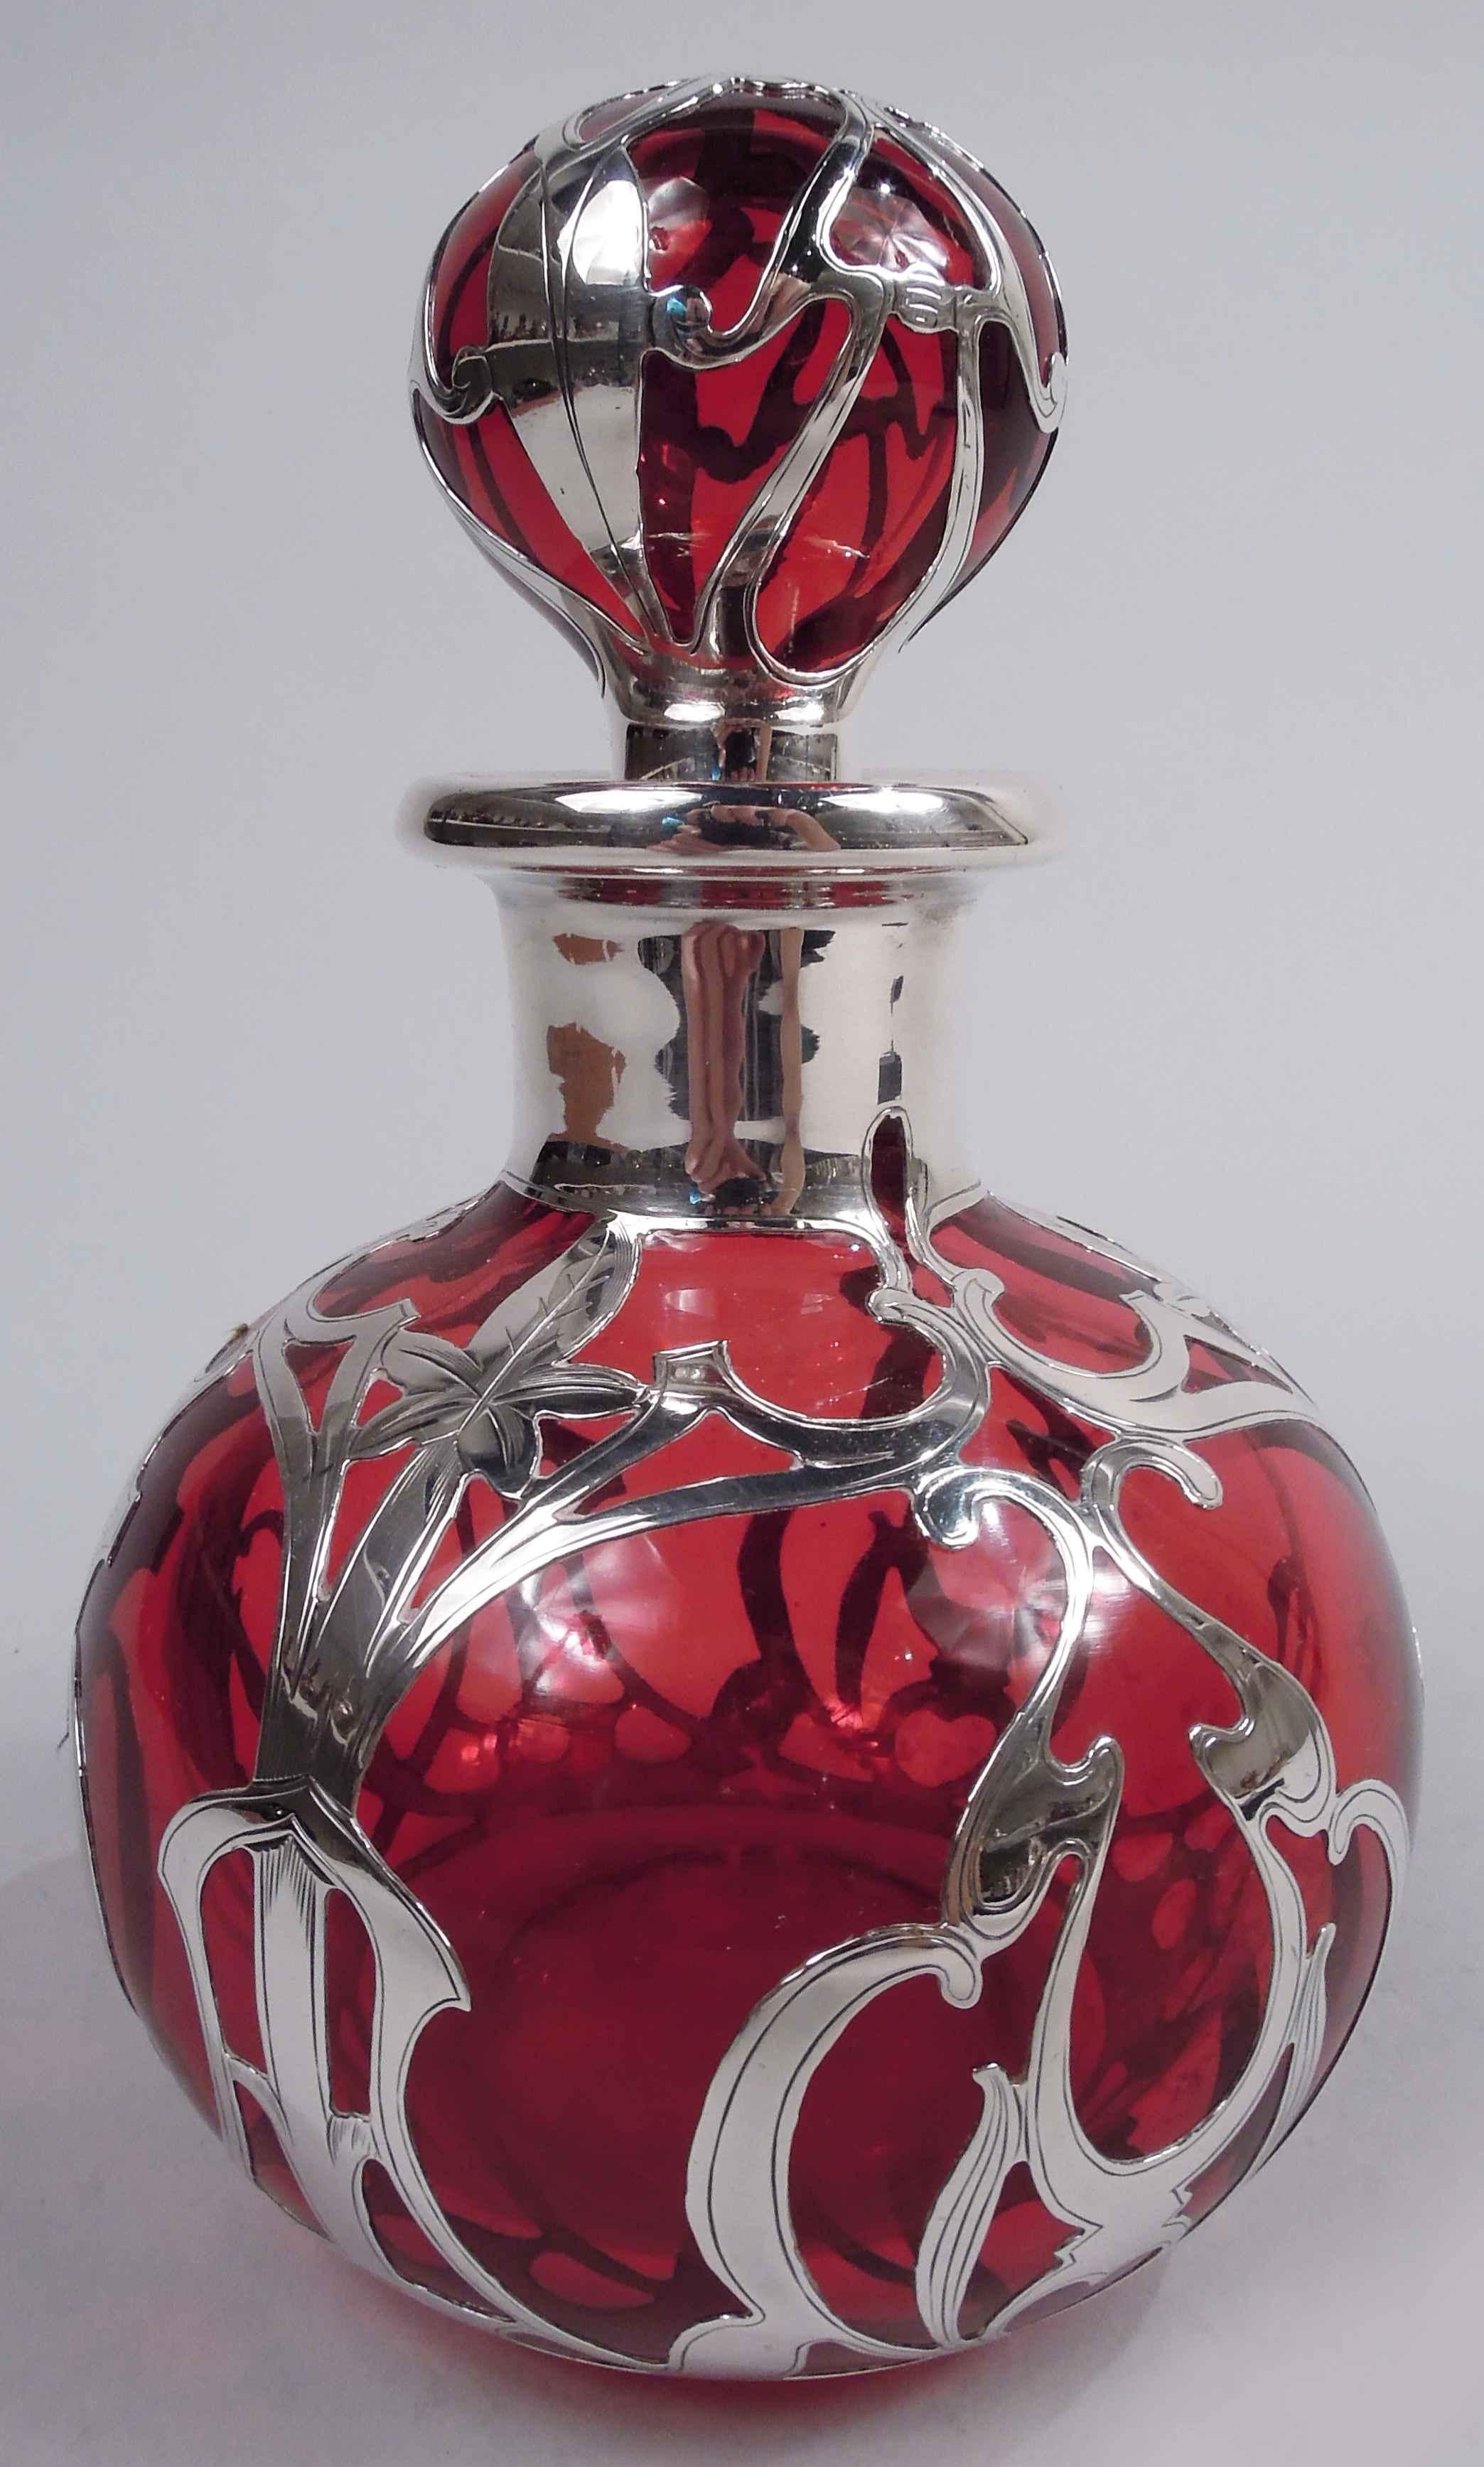 Art Nouveau glass perfume with engraved silver overlay. Made by Gorham in Providence, ca 1900. Globular with short neck and everted rim in silver collar; ball stopper. Overlay in open stylized pattern with leafing tendrils and interlaced and